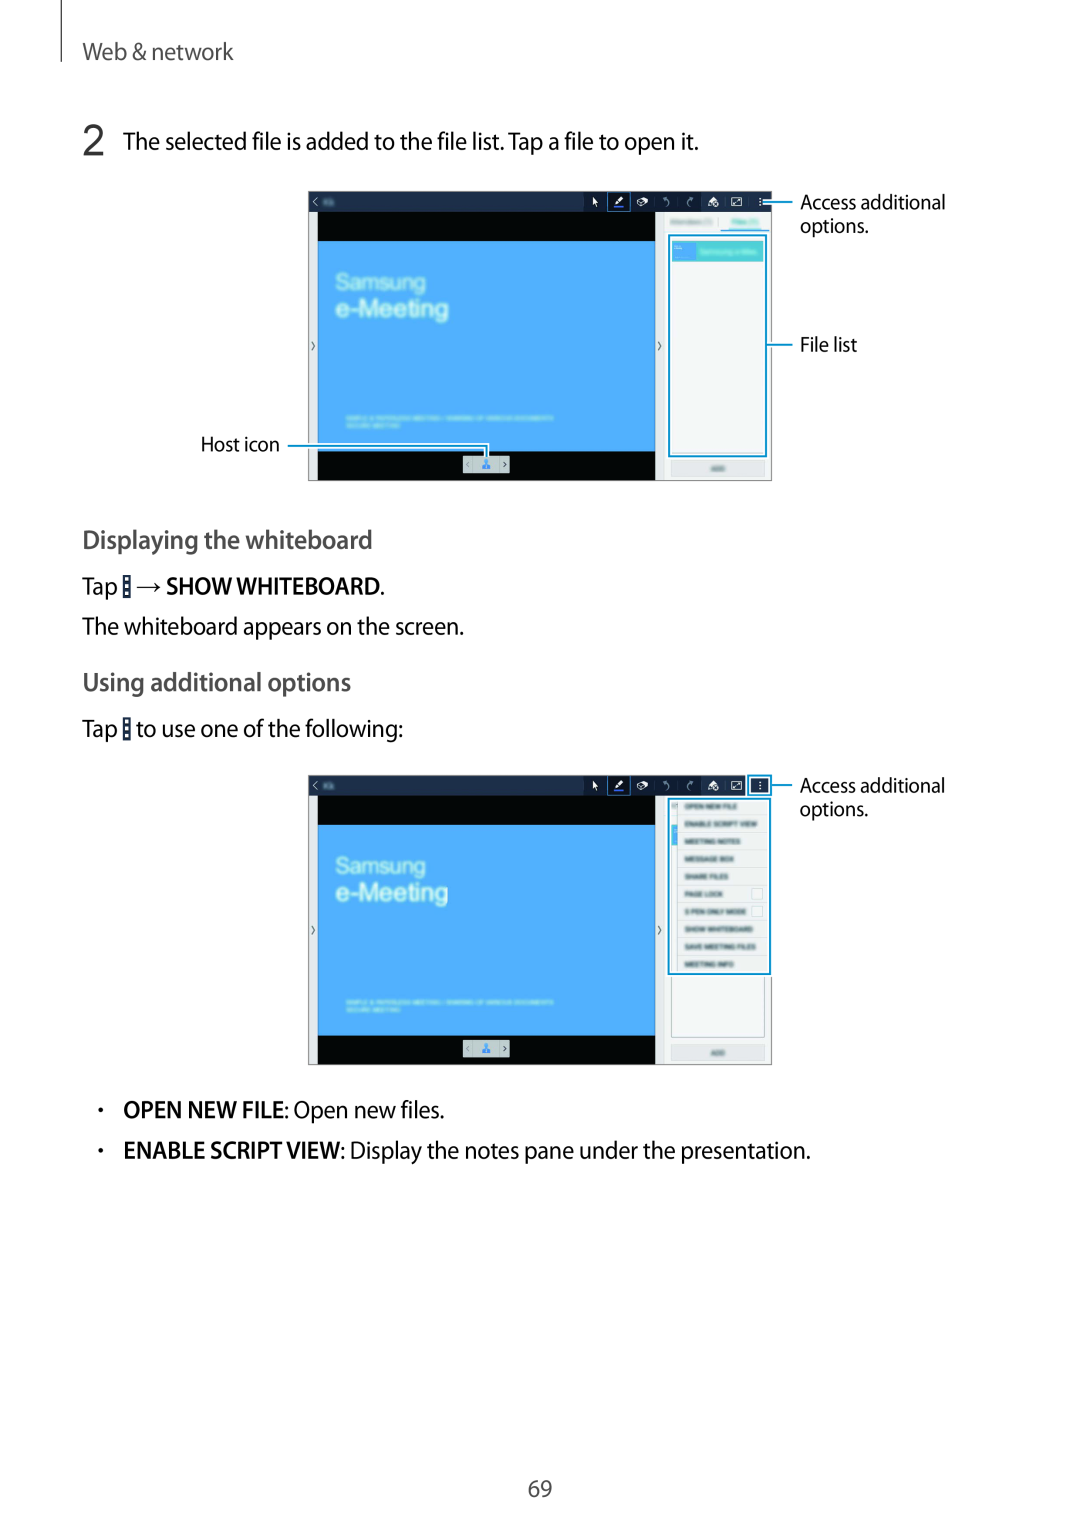 Samsung SM-P9000ZKAXEO manual Displaying the whiteboard, Using additional options, Tap →SHOW WHITEBOARD, Web & network 